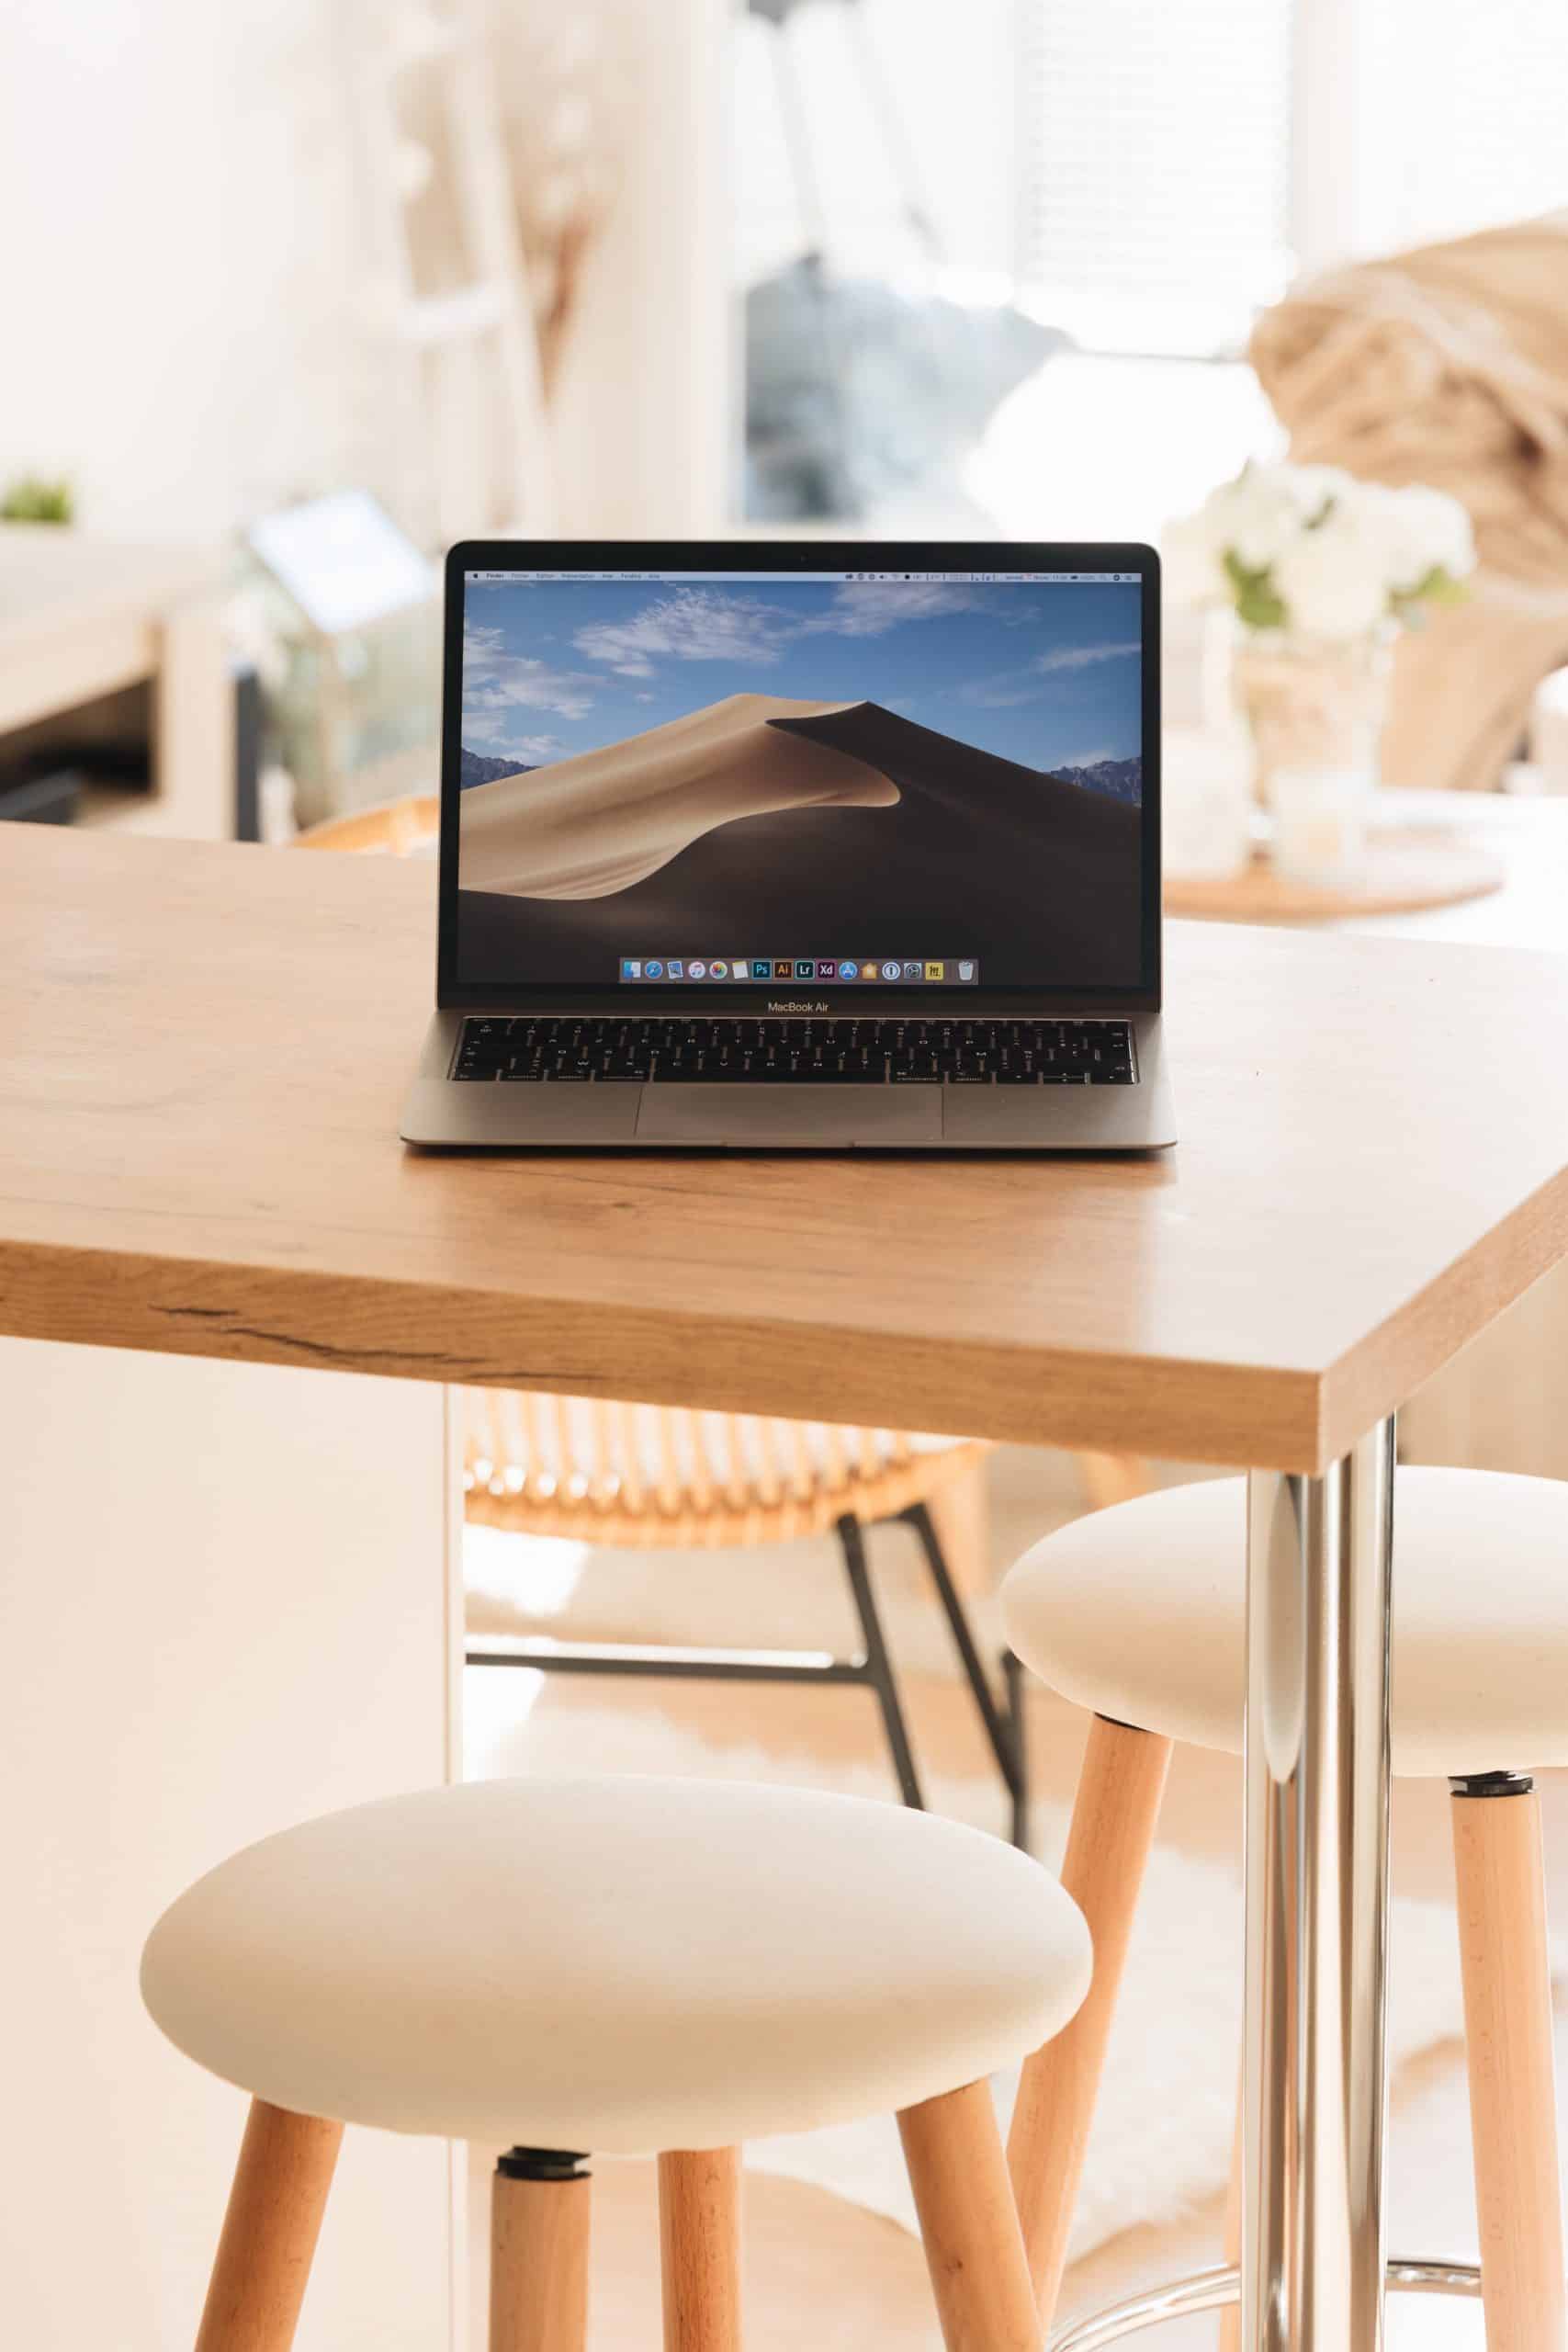 How Tough Are MacBook Pros? My Experience